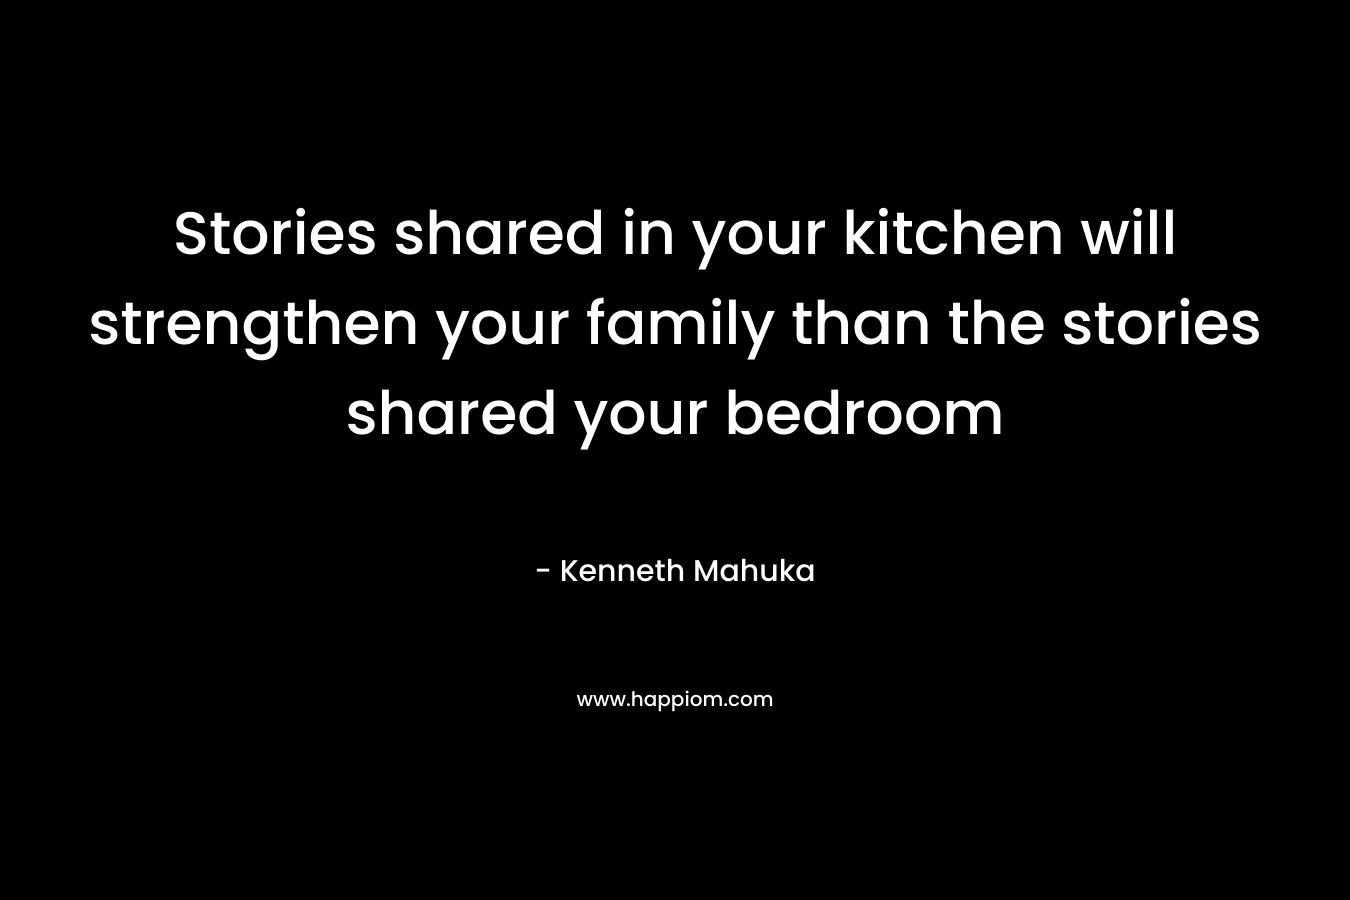 Stories shared in your kitchen will strengthen your family than the stories shared your bedroom